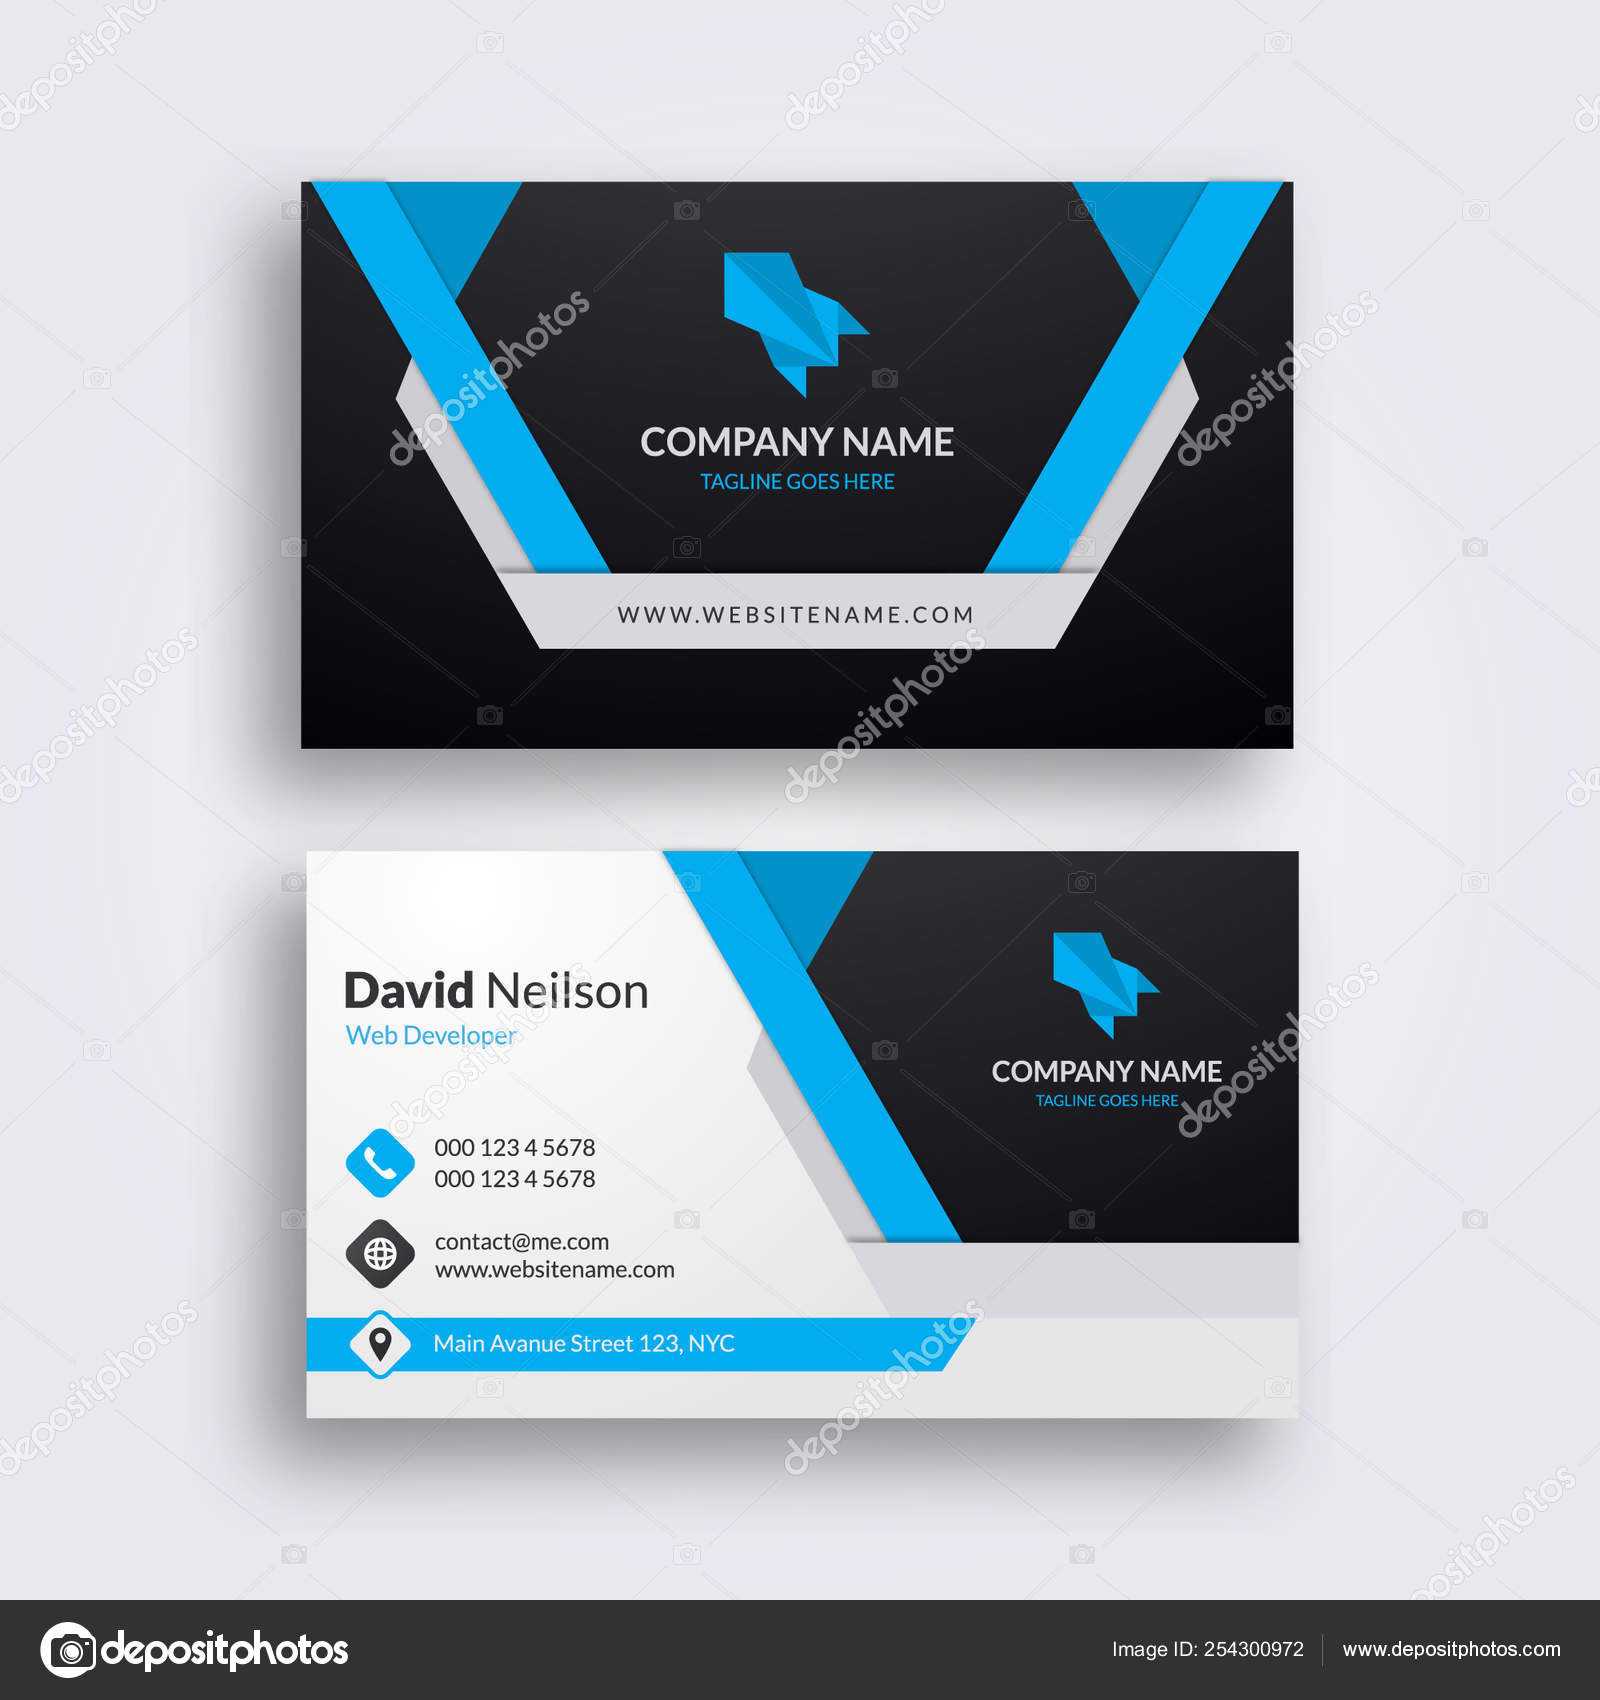 Professional Abstract Business Card Clean Fresh Design Pertaining To Visiting Card Illustrator Templates Download